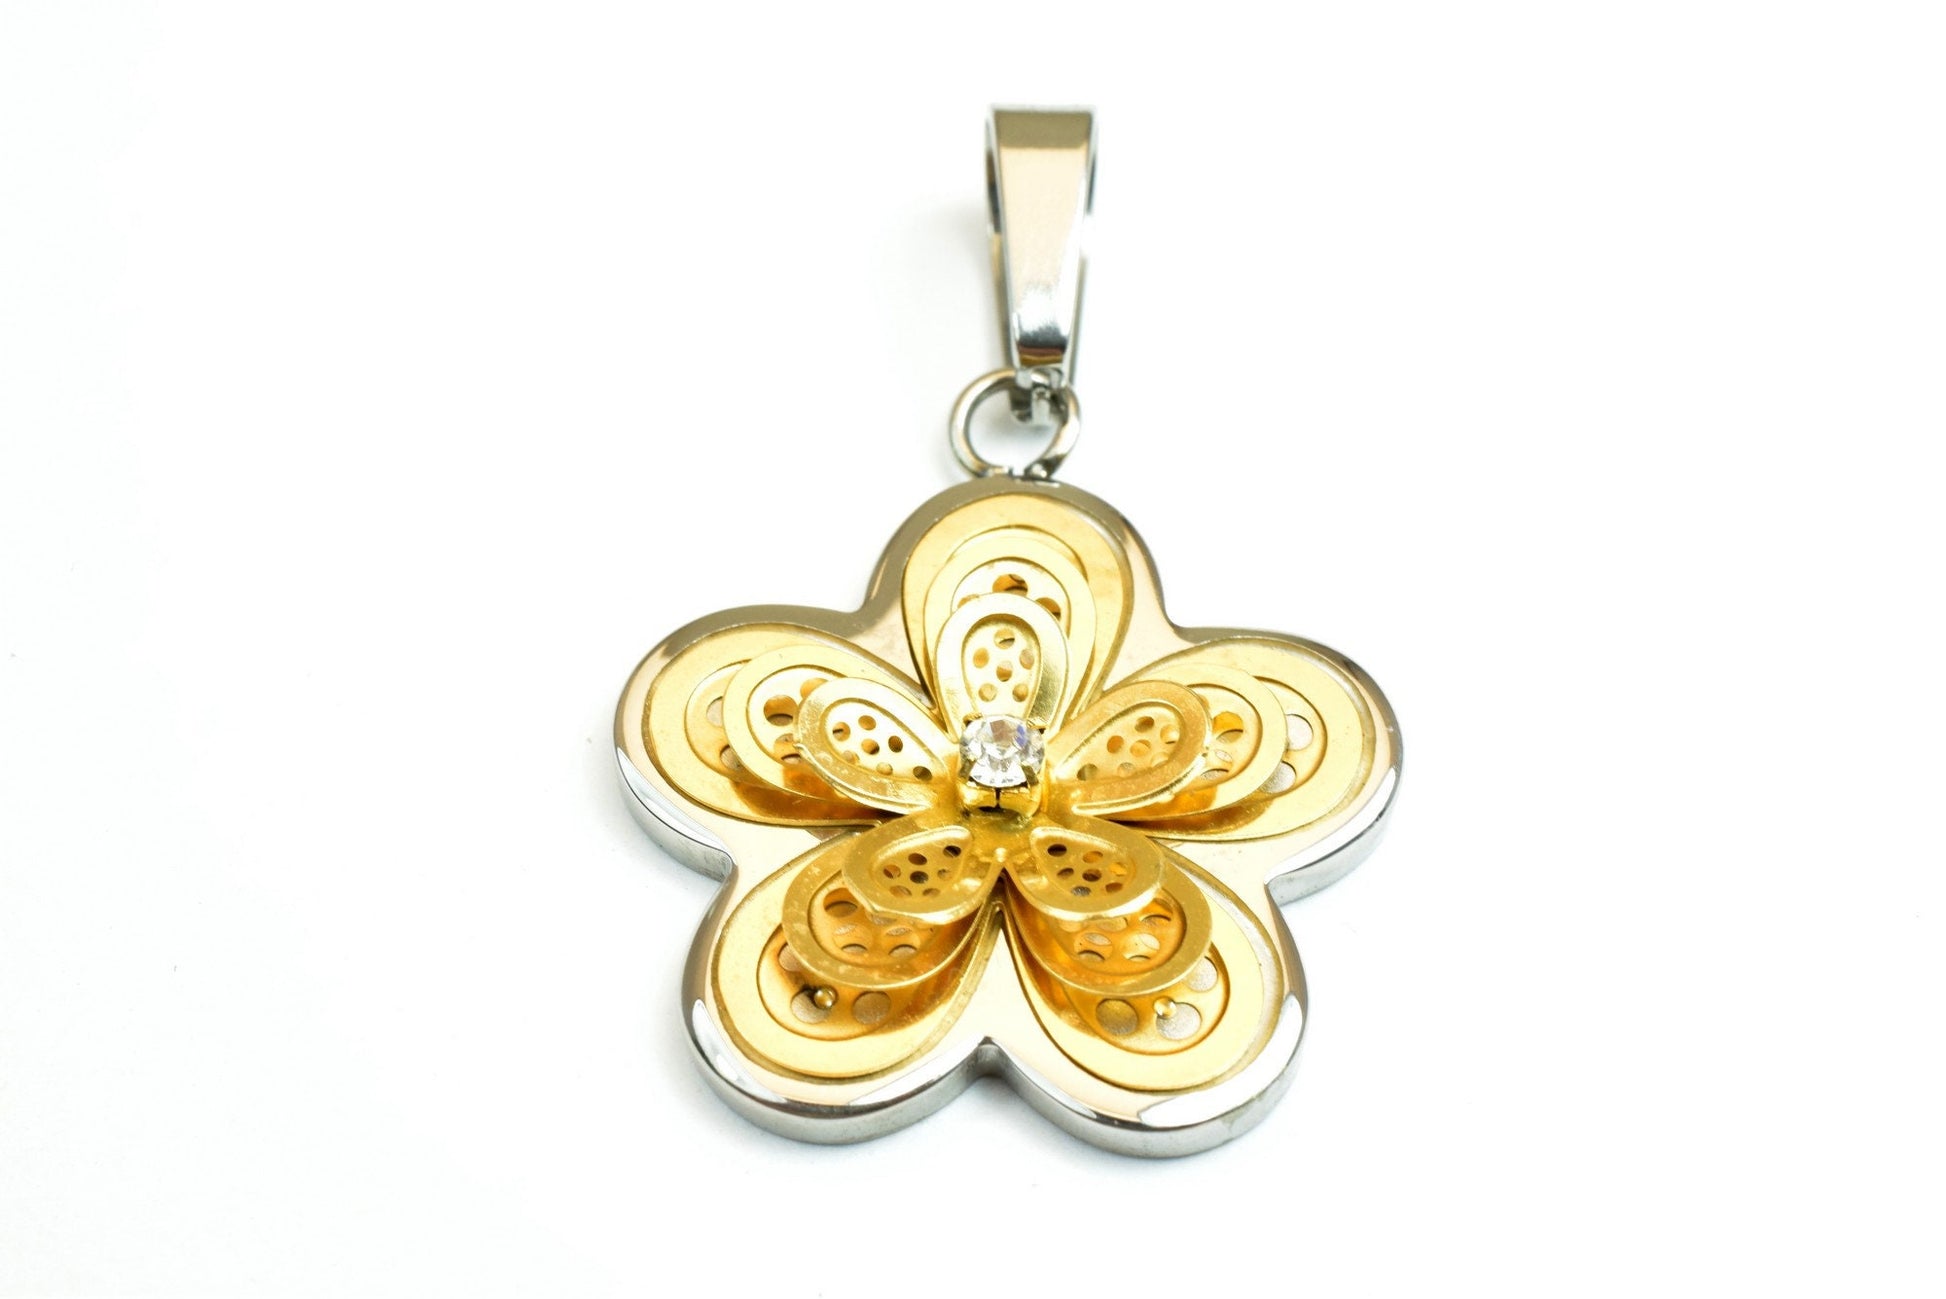 18K Gold Filled Flower Stainless Steel Pendants Size 32x27mm With Rhinestone CZ Cubic Zirconia For Jewelry Making